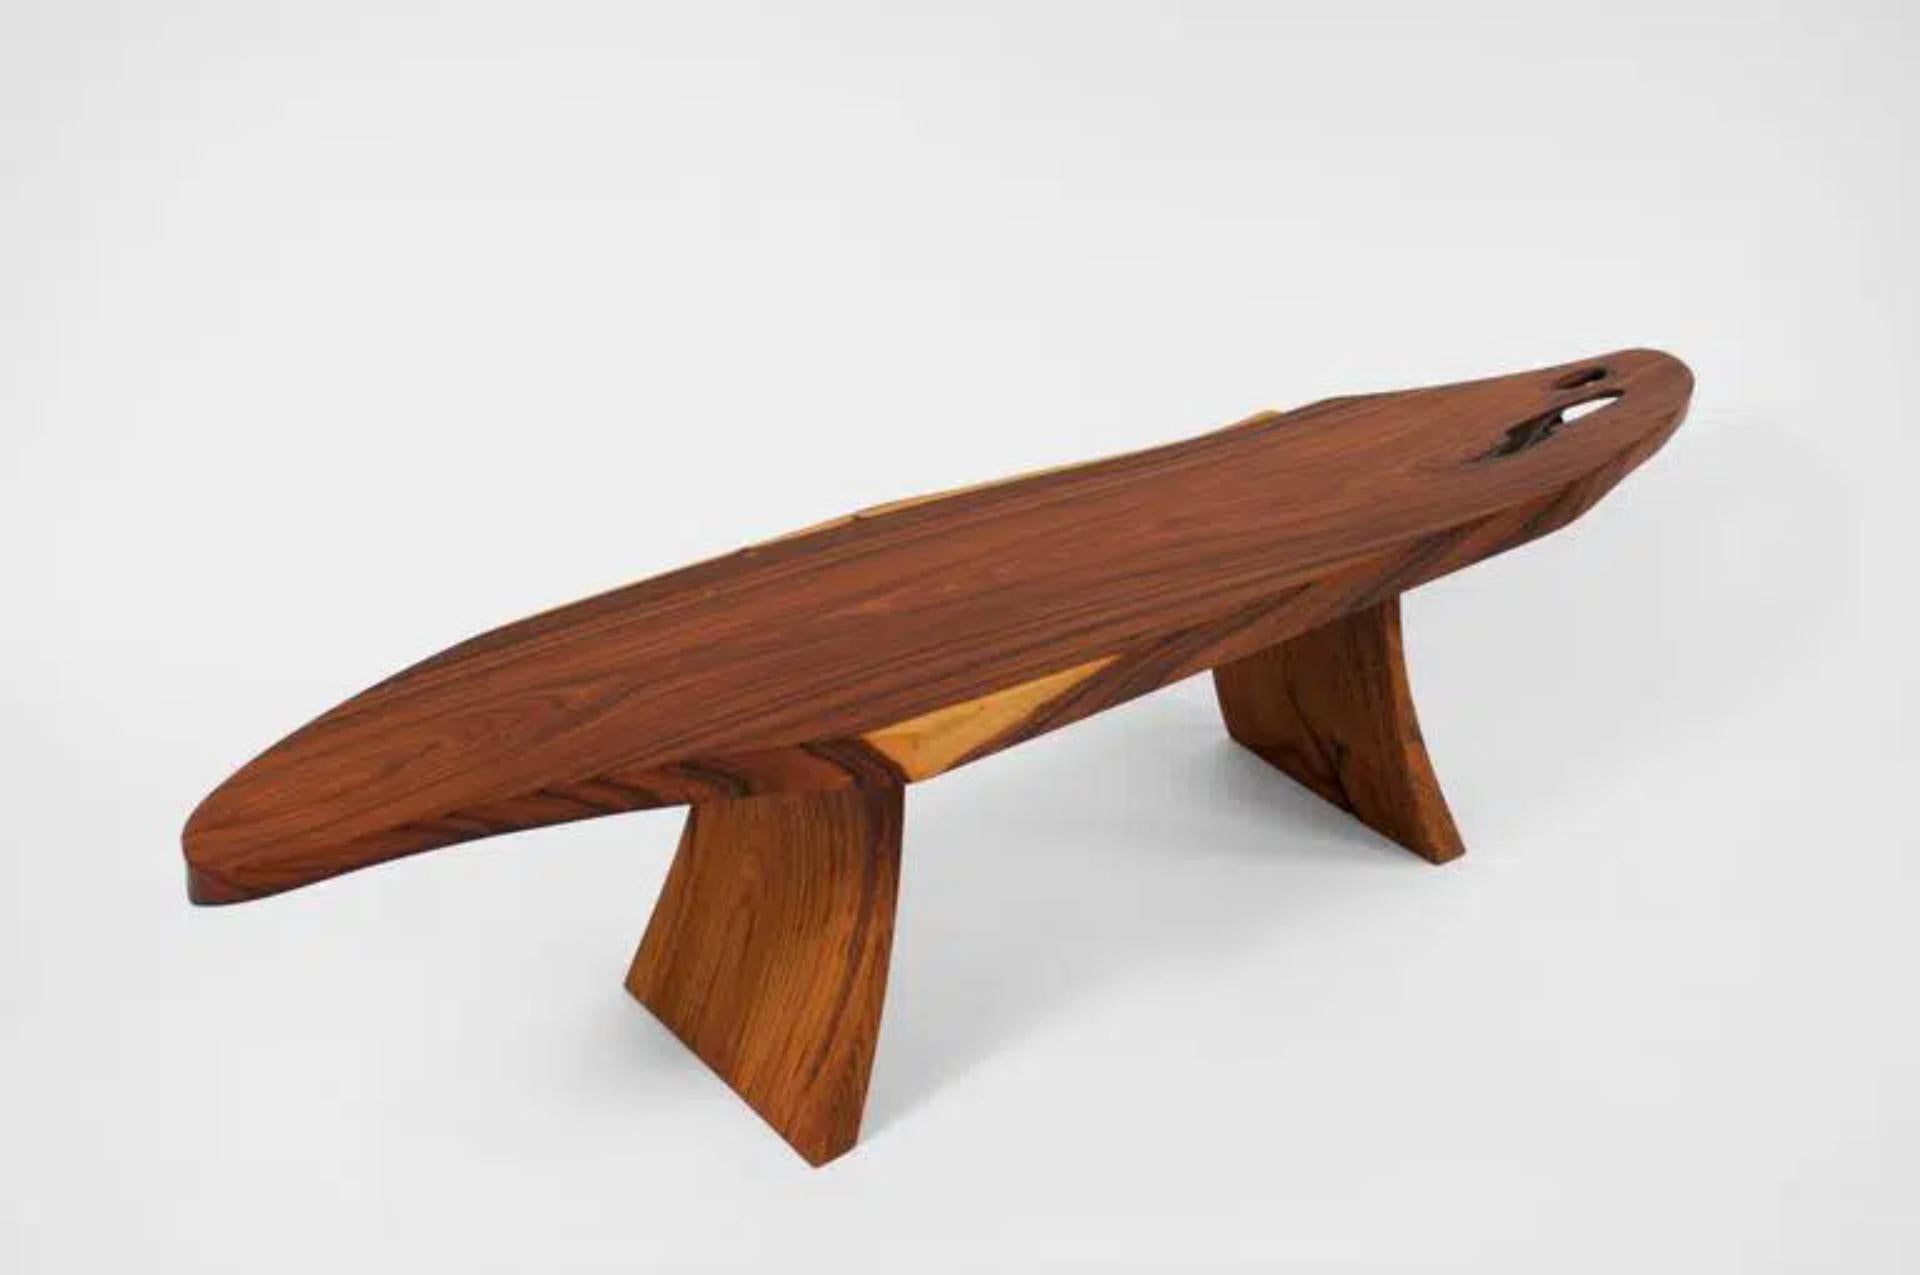 Unique signed rosewood table by Jörg Pietschmann
Table, Santos Palisander, teak, T1305
Measures: H 37.5 x W 160 x D 35 cm tabletop 4.5 cm
Extremely elegant tabletop of rosewood (Santos palisander),
the curved legs are carved out from a block of